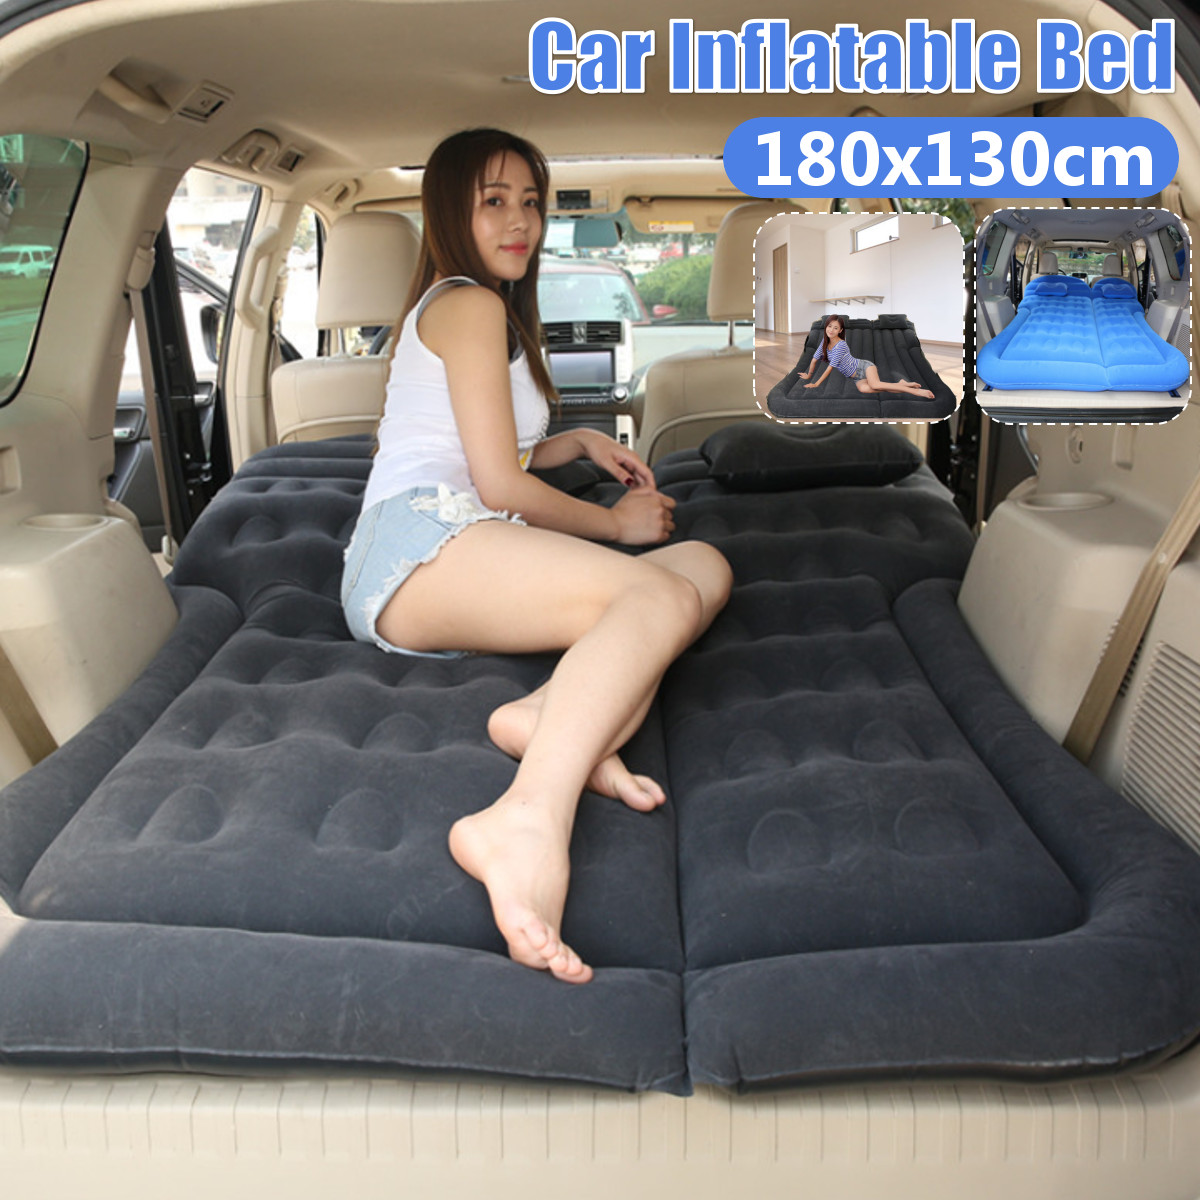 180x130cm-Multifunctional-Inflatable-Car-Air-Mattress-Durable-Back-Seat-Cover-Travel-Bed-Moisture-pr-1888970-1